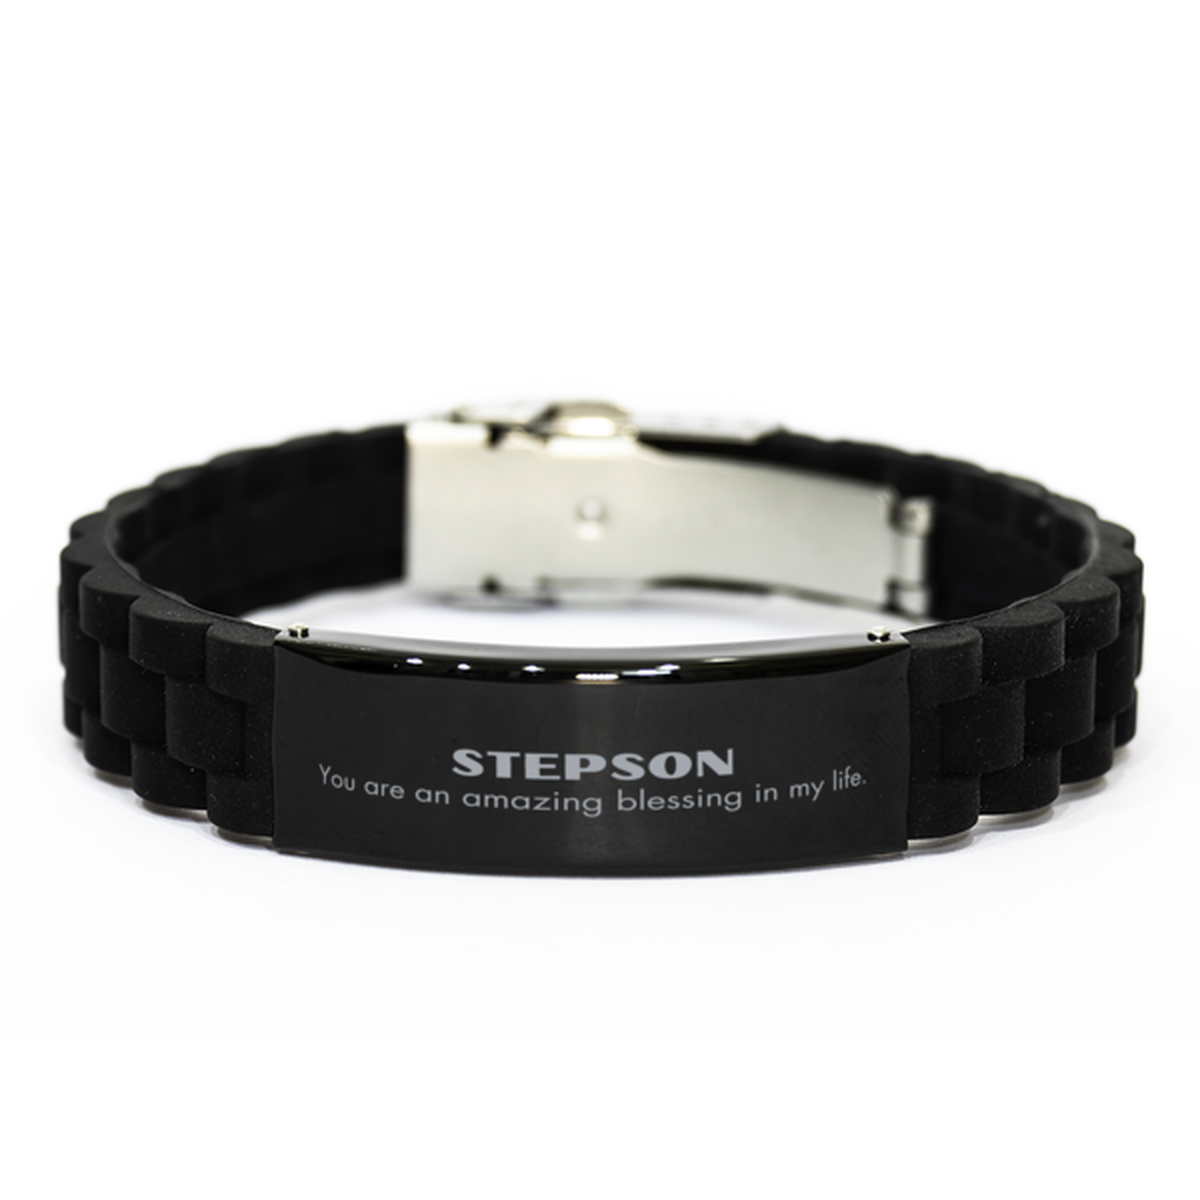 Stepson Black Glidelock Clasp Bracelet, You are an amazing blessing in my life, Thank You Gifts For Stepson, Inspirational Birthday Christmas Unique Gifts For Stepson